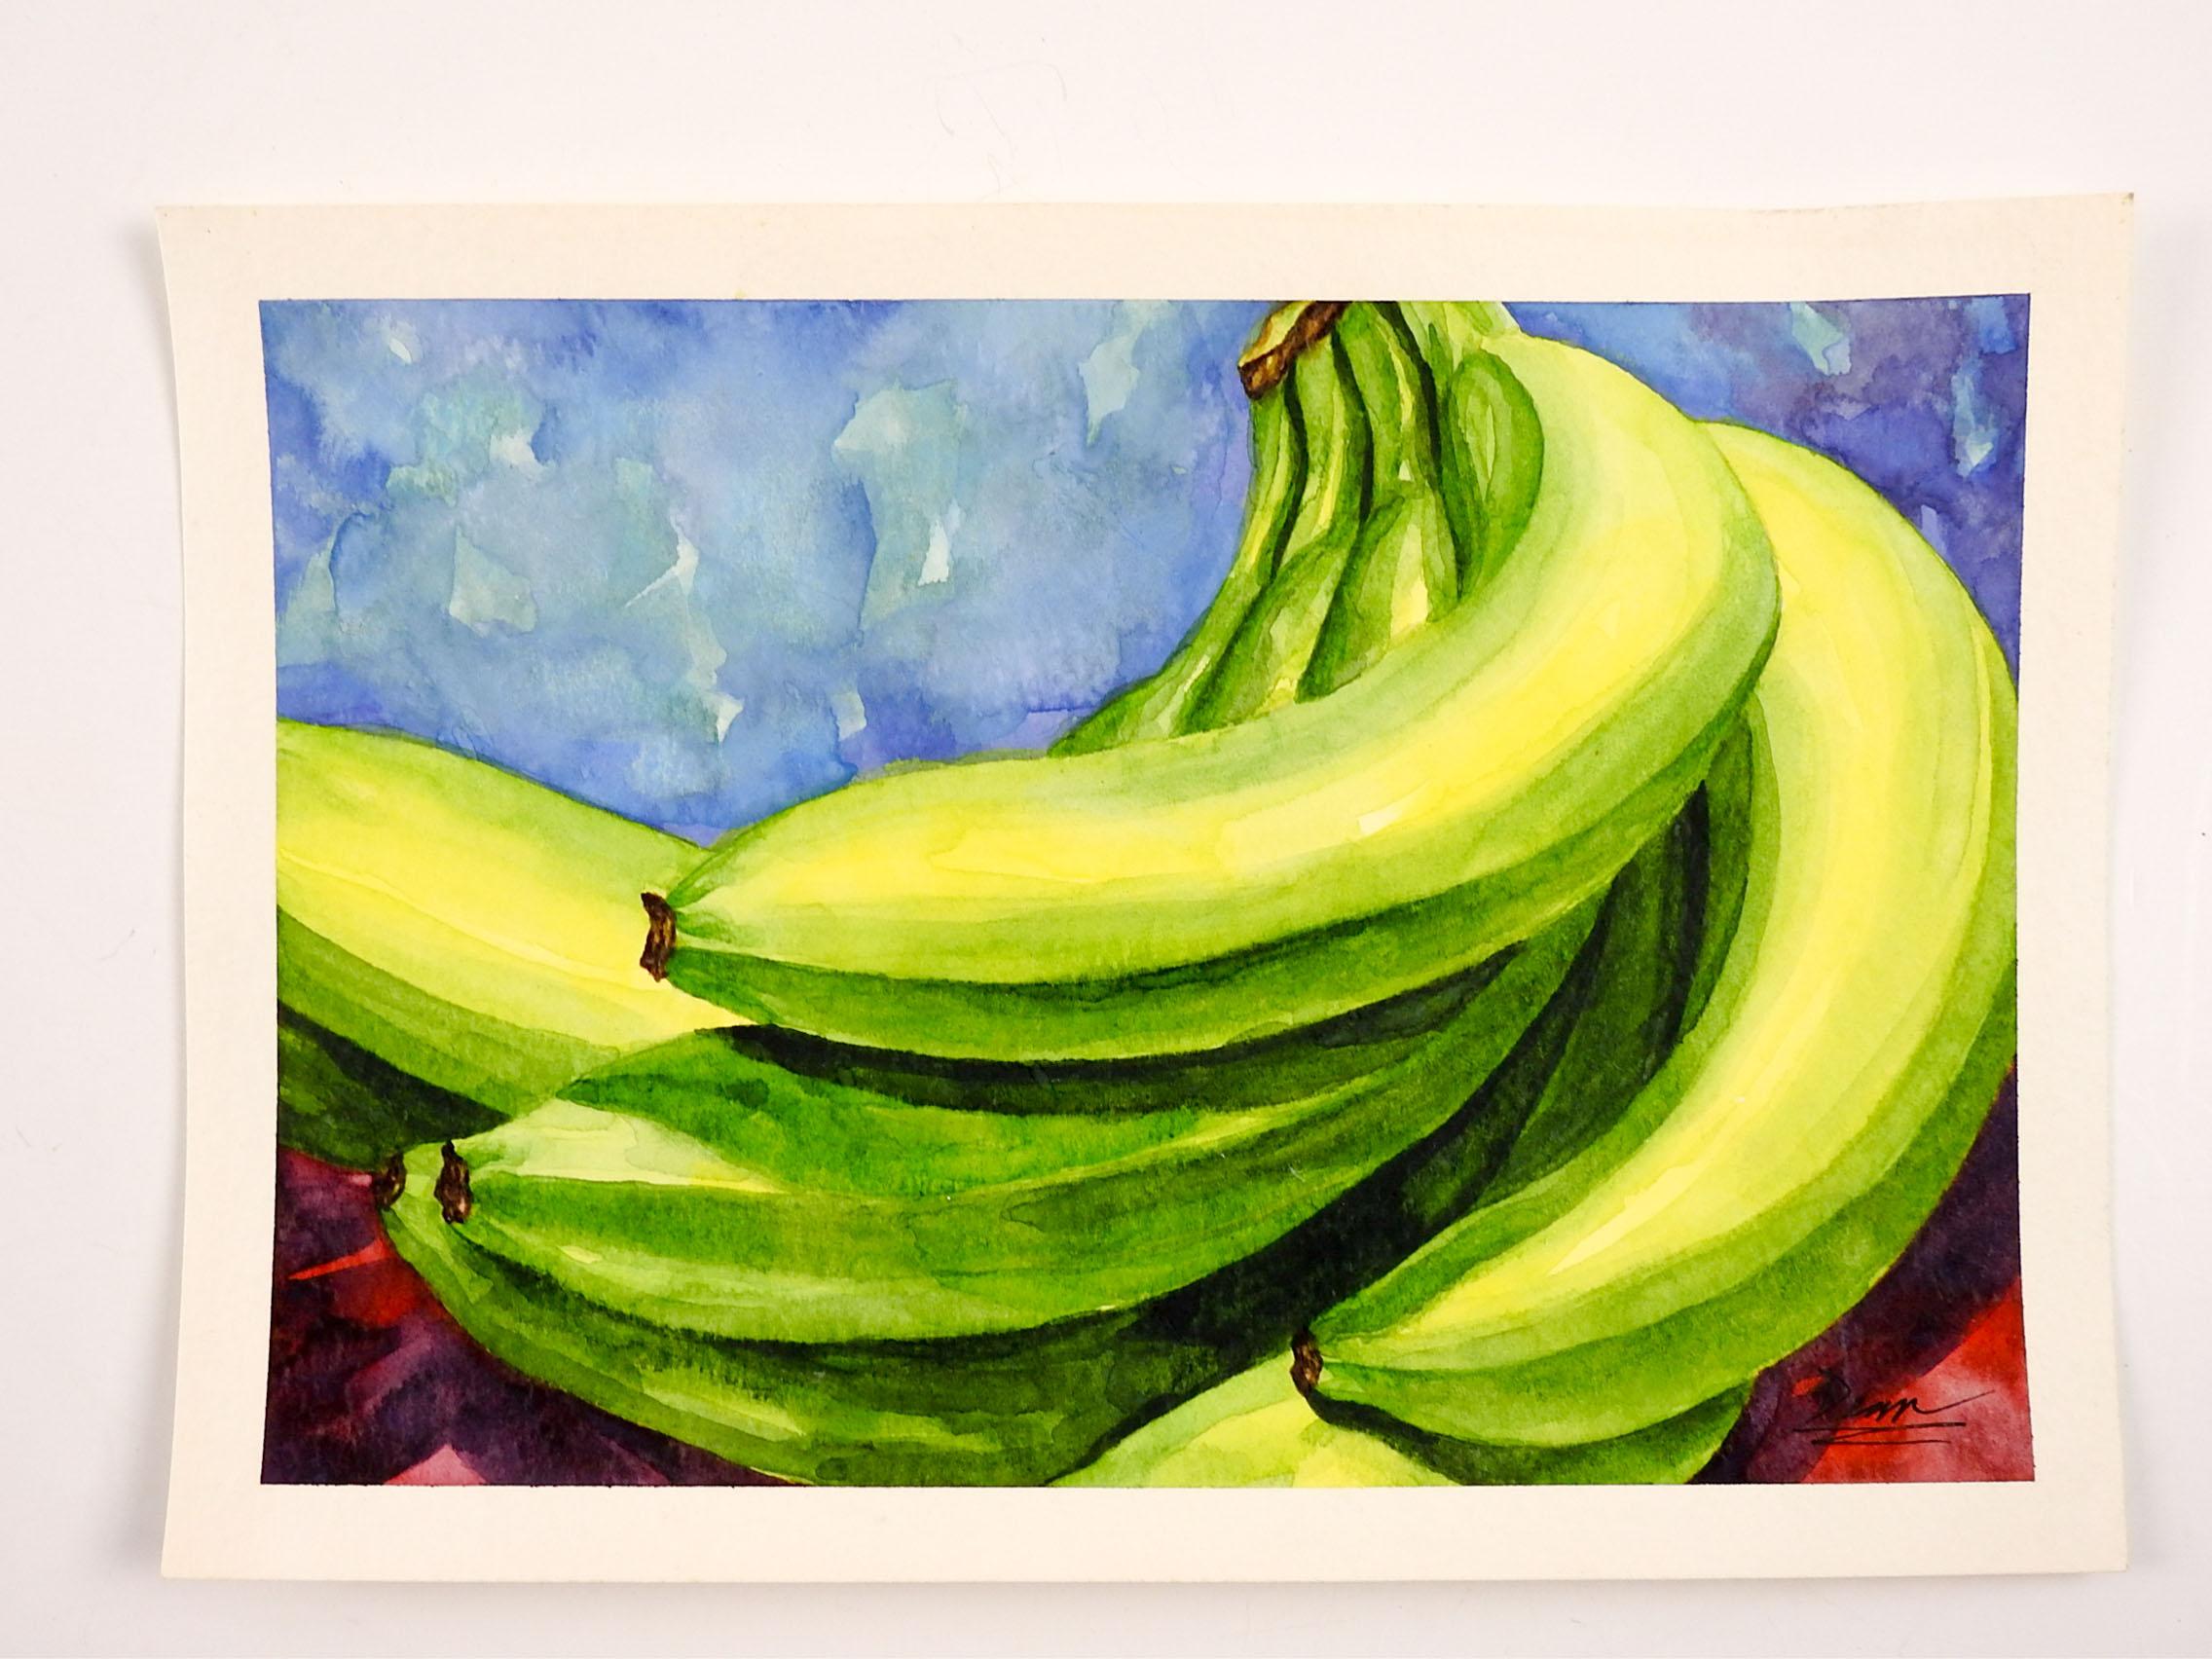 Bananas still life watercolor on paper painting. Signed Dean lower right corner. Unframed.